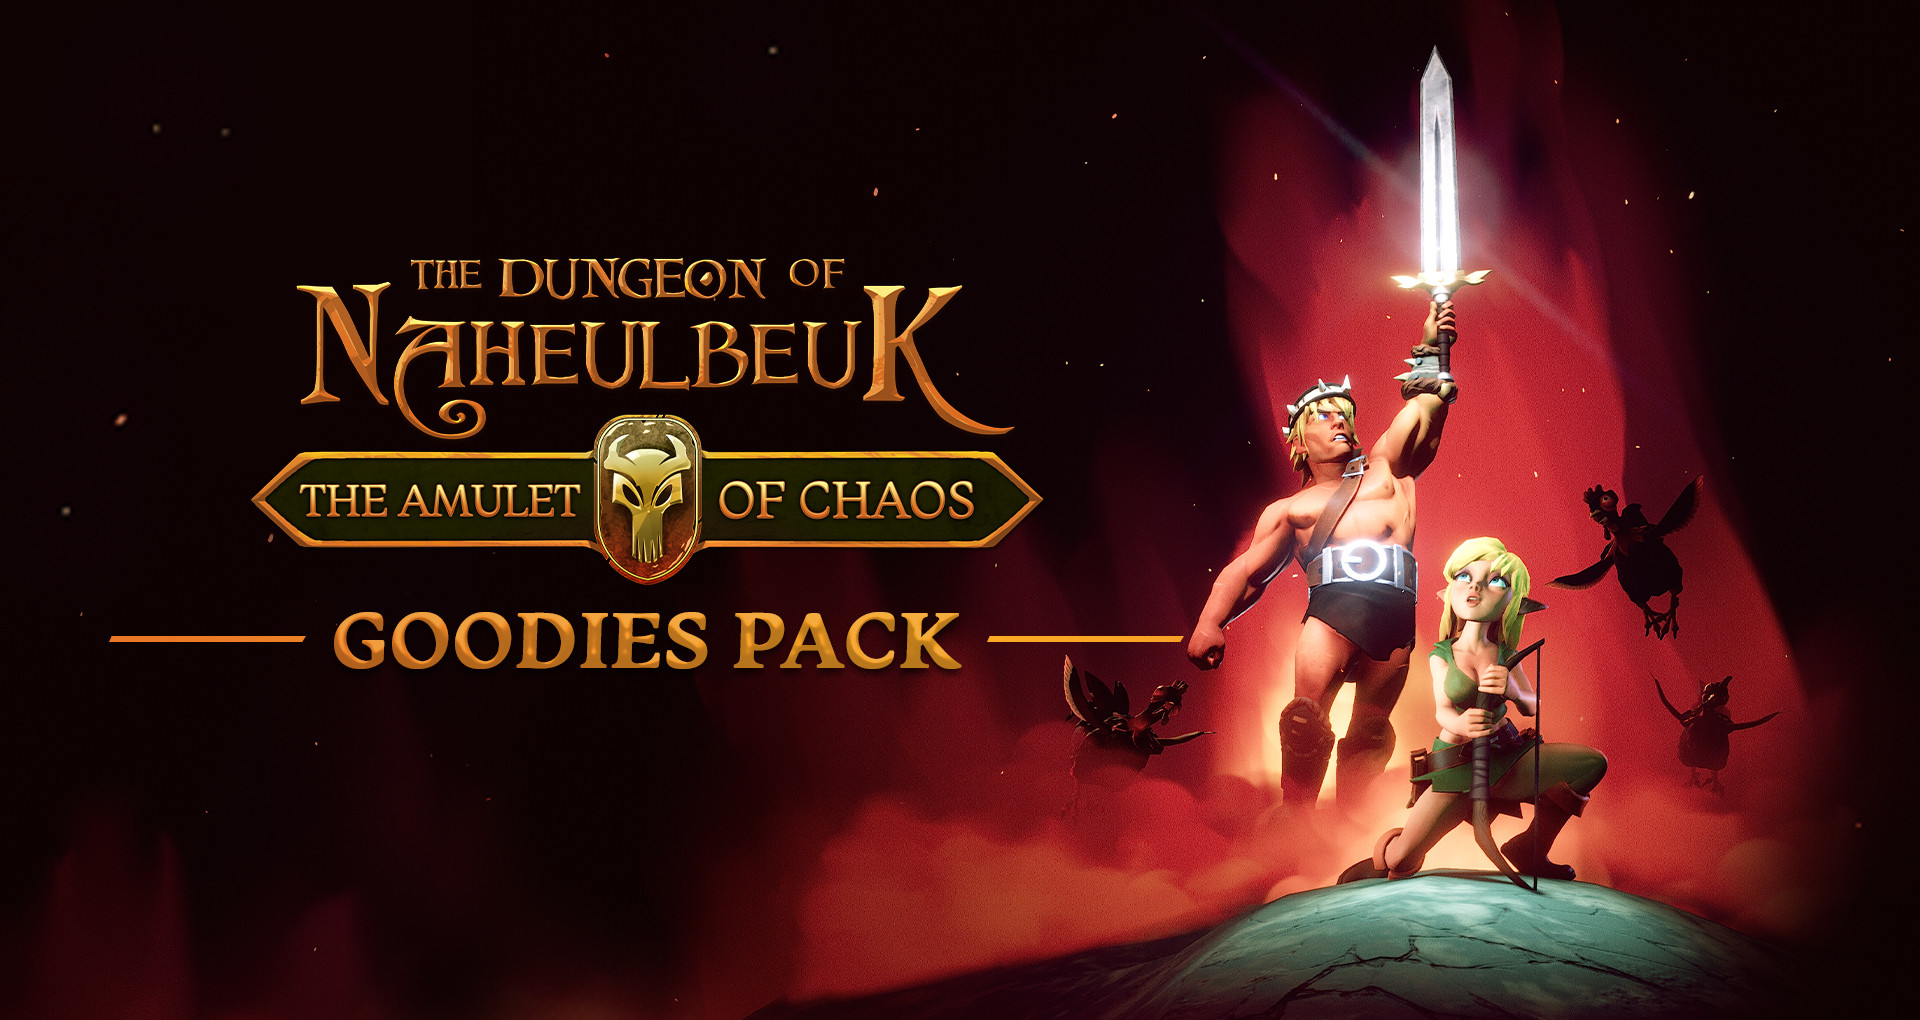 The Dungeon Of Naheulbeuk: The Amulet Of Chaos - Goodies Pack Featured Screenshot #1